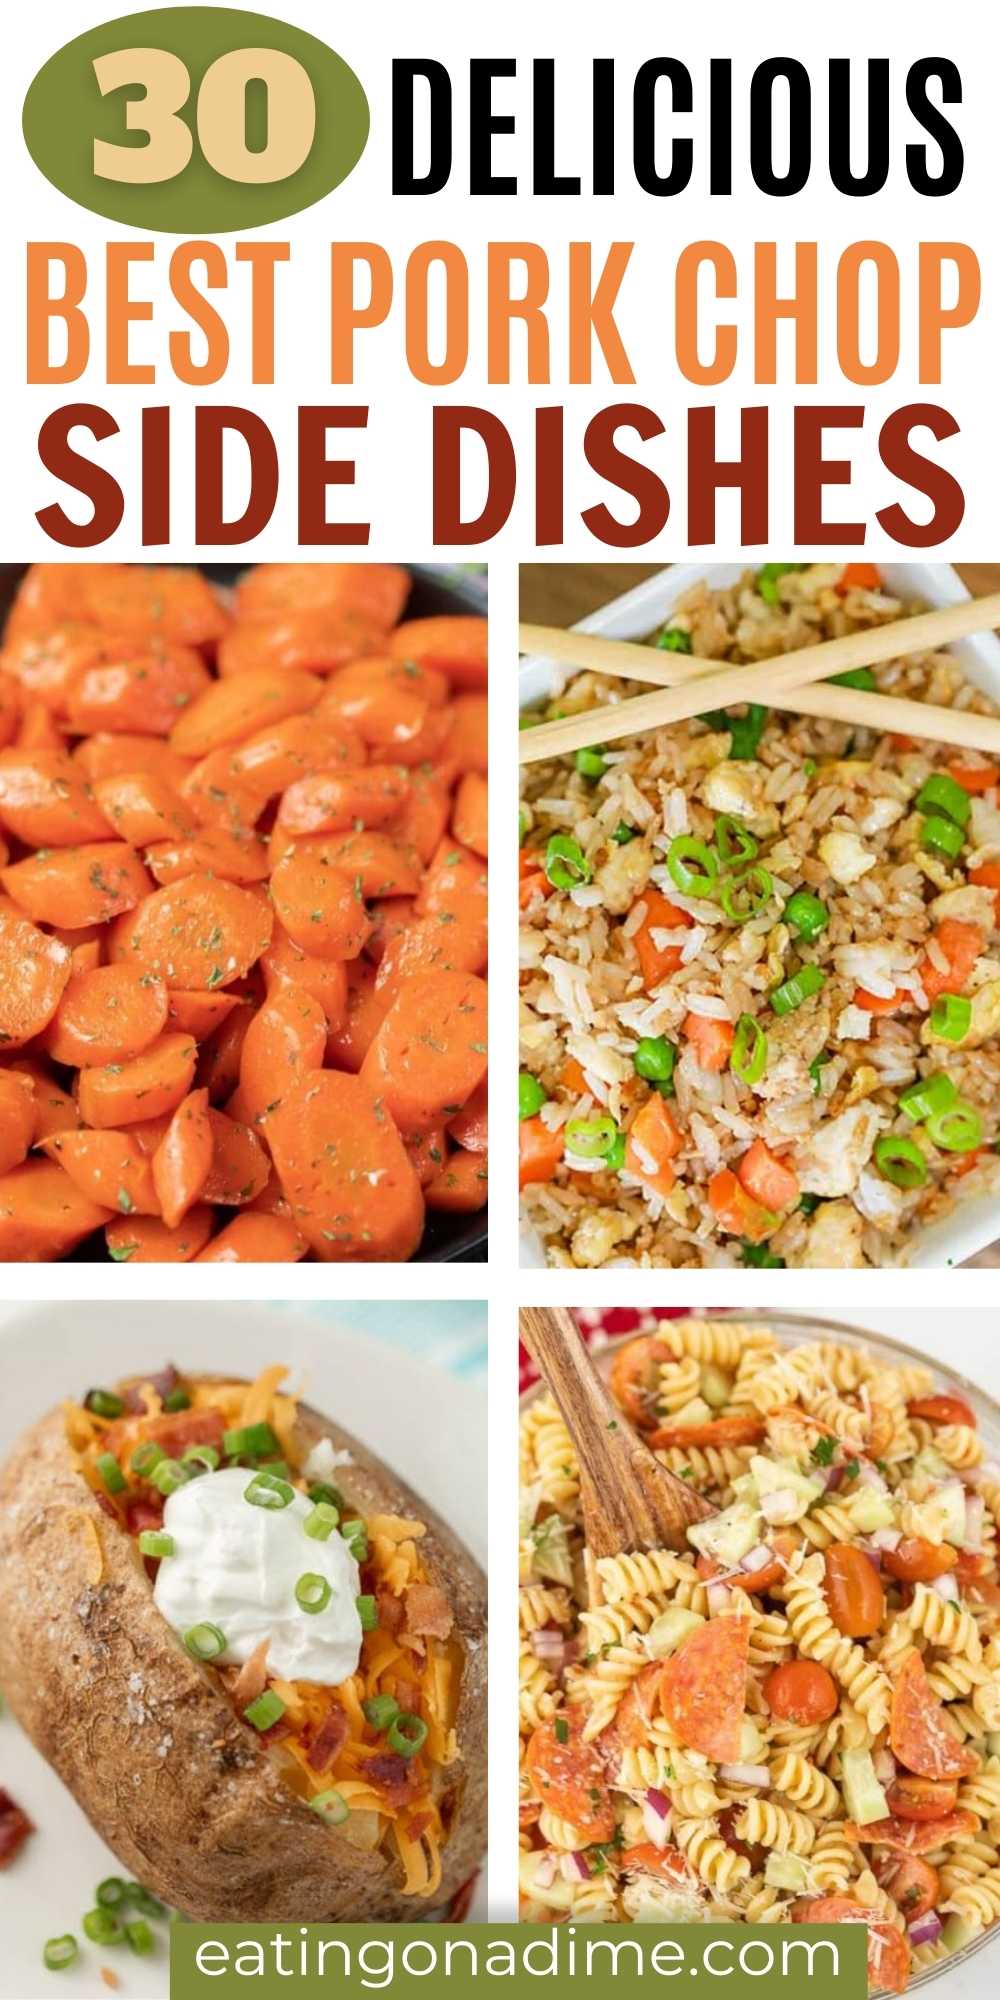 Try some of these delicious Pork Chop Sides that your family will love. Learn what to serve with pork chops for an amazing meal. You will love these simple side dishes that go great with grilled or fried pork chops.  Learn what goes with pork chops that include some healthy options too.  #eatingonadime #sidedishrecipes #sidedishes #porkchops #whattoservewith #porksides 
